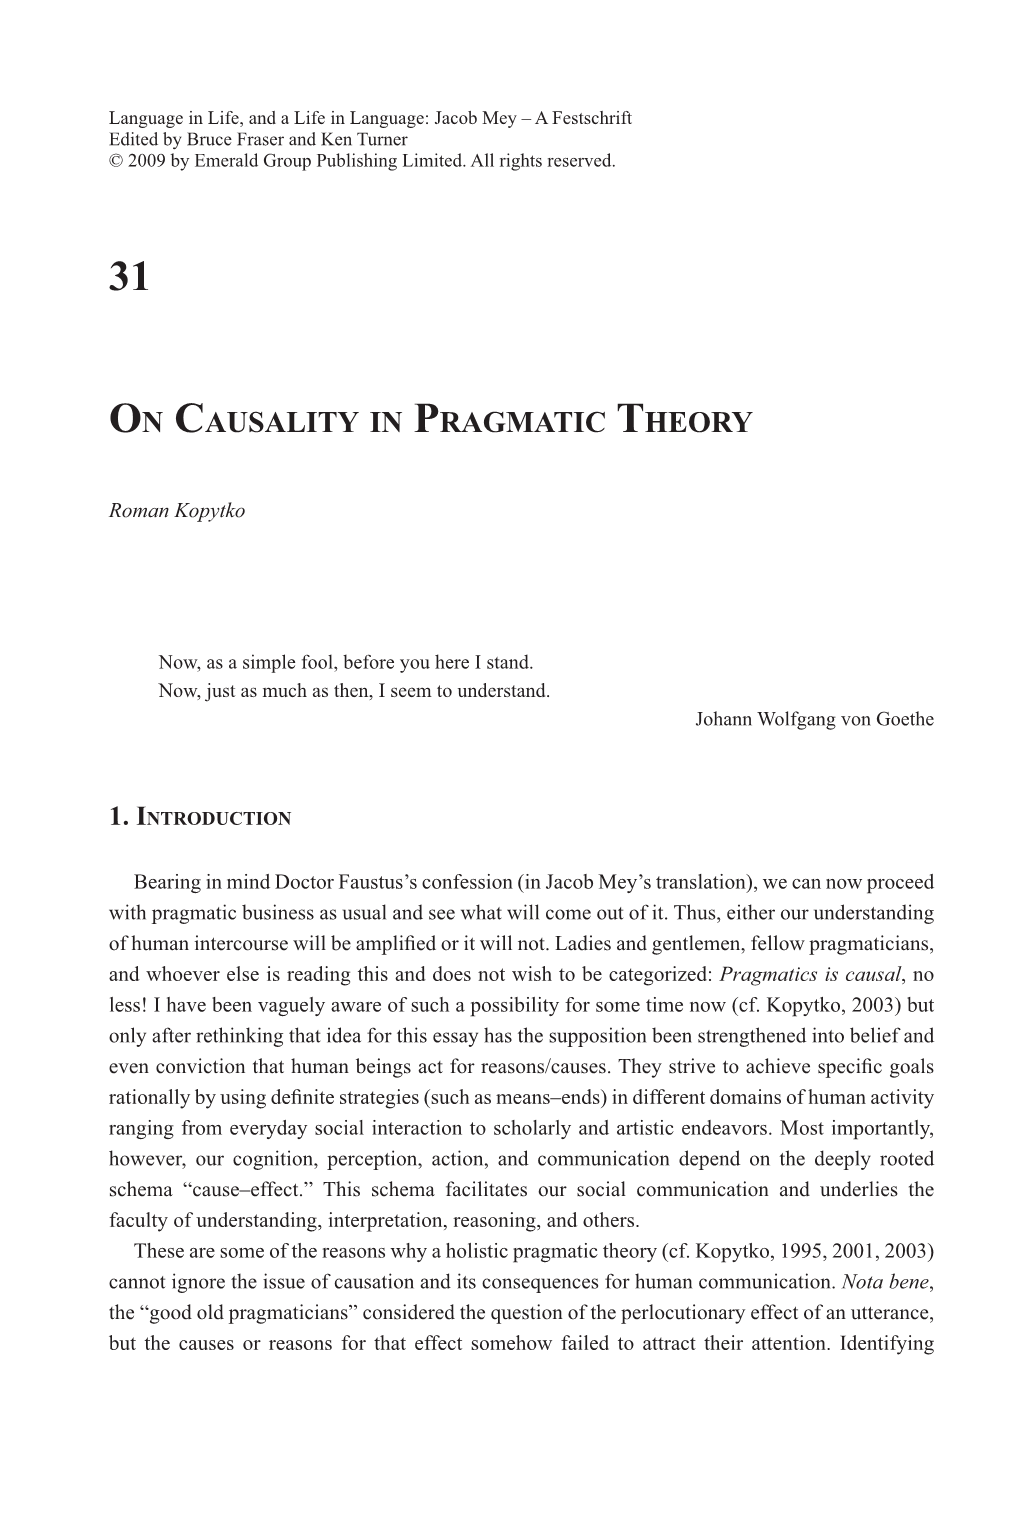 On Causality in Pragmatic Theory